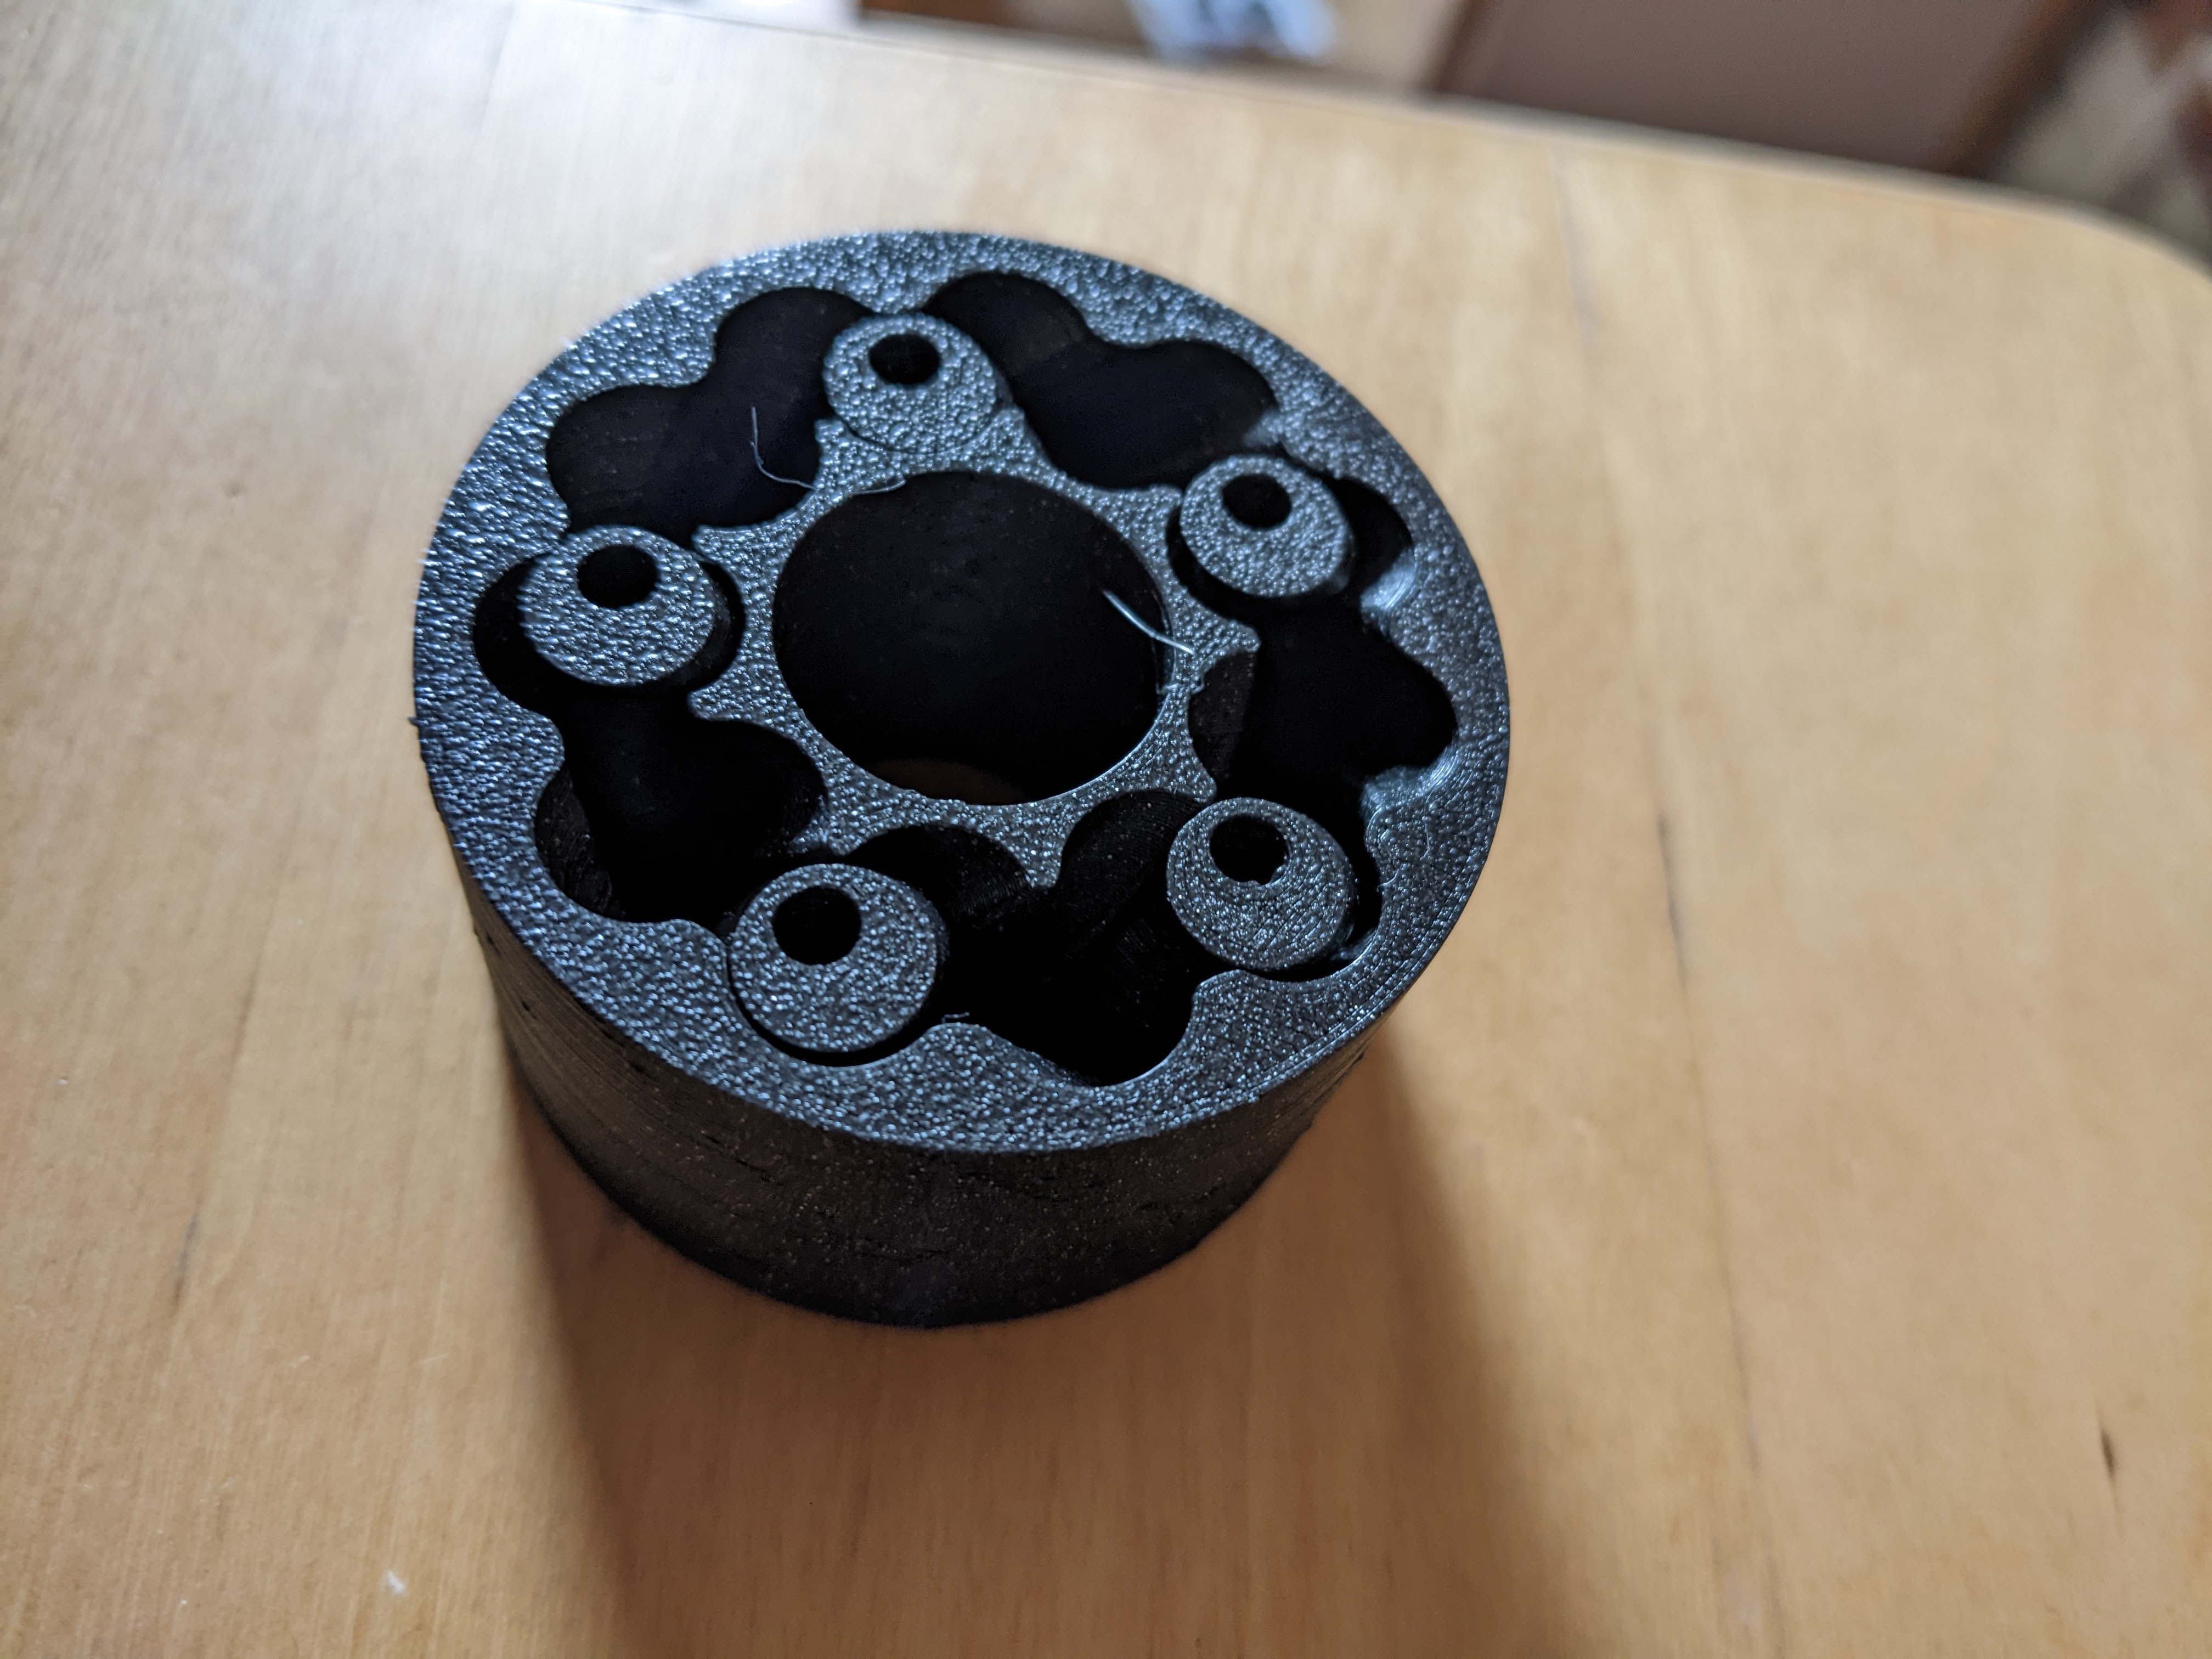 Print-in-place eccentric cycloid planetary gear